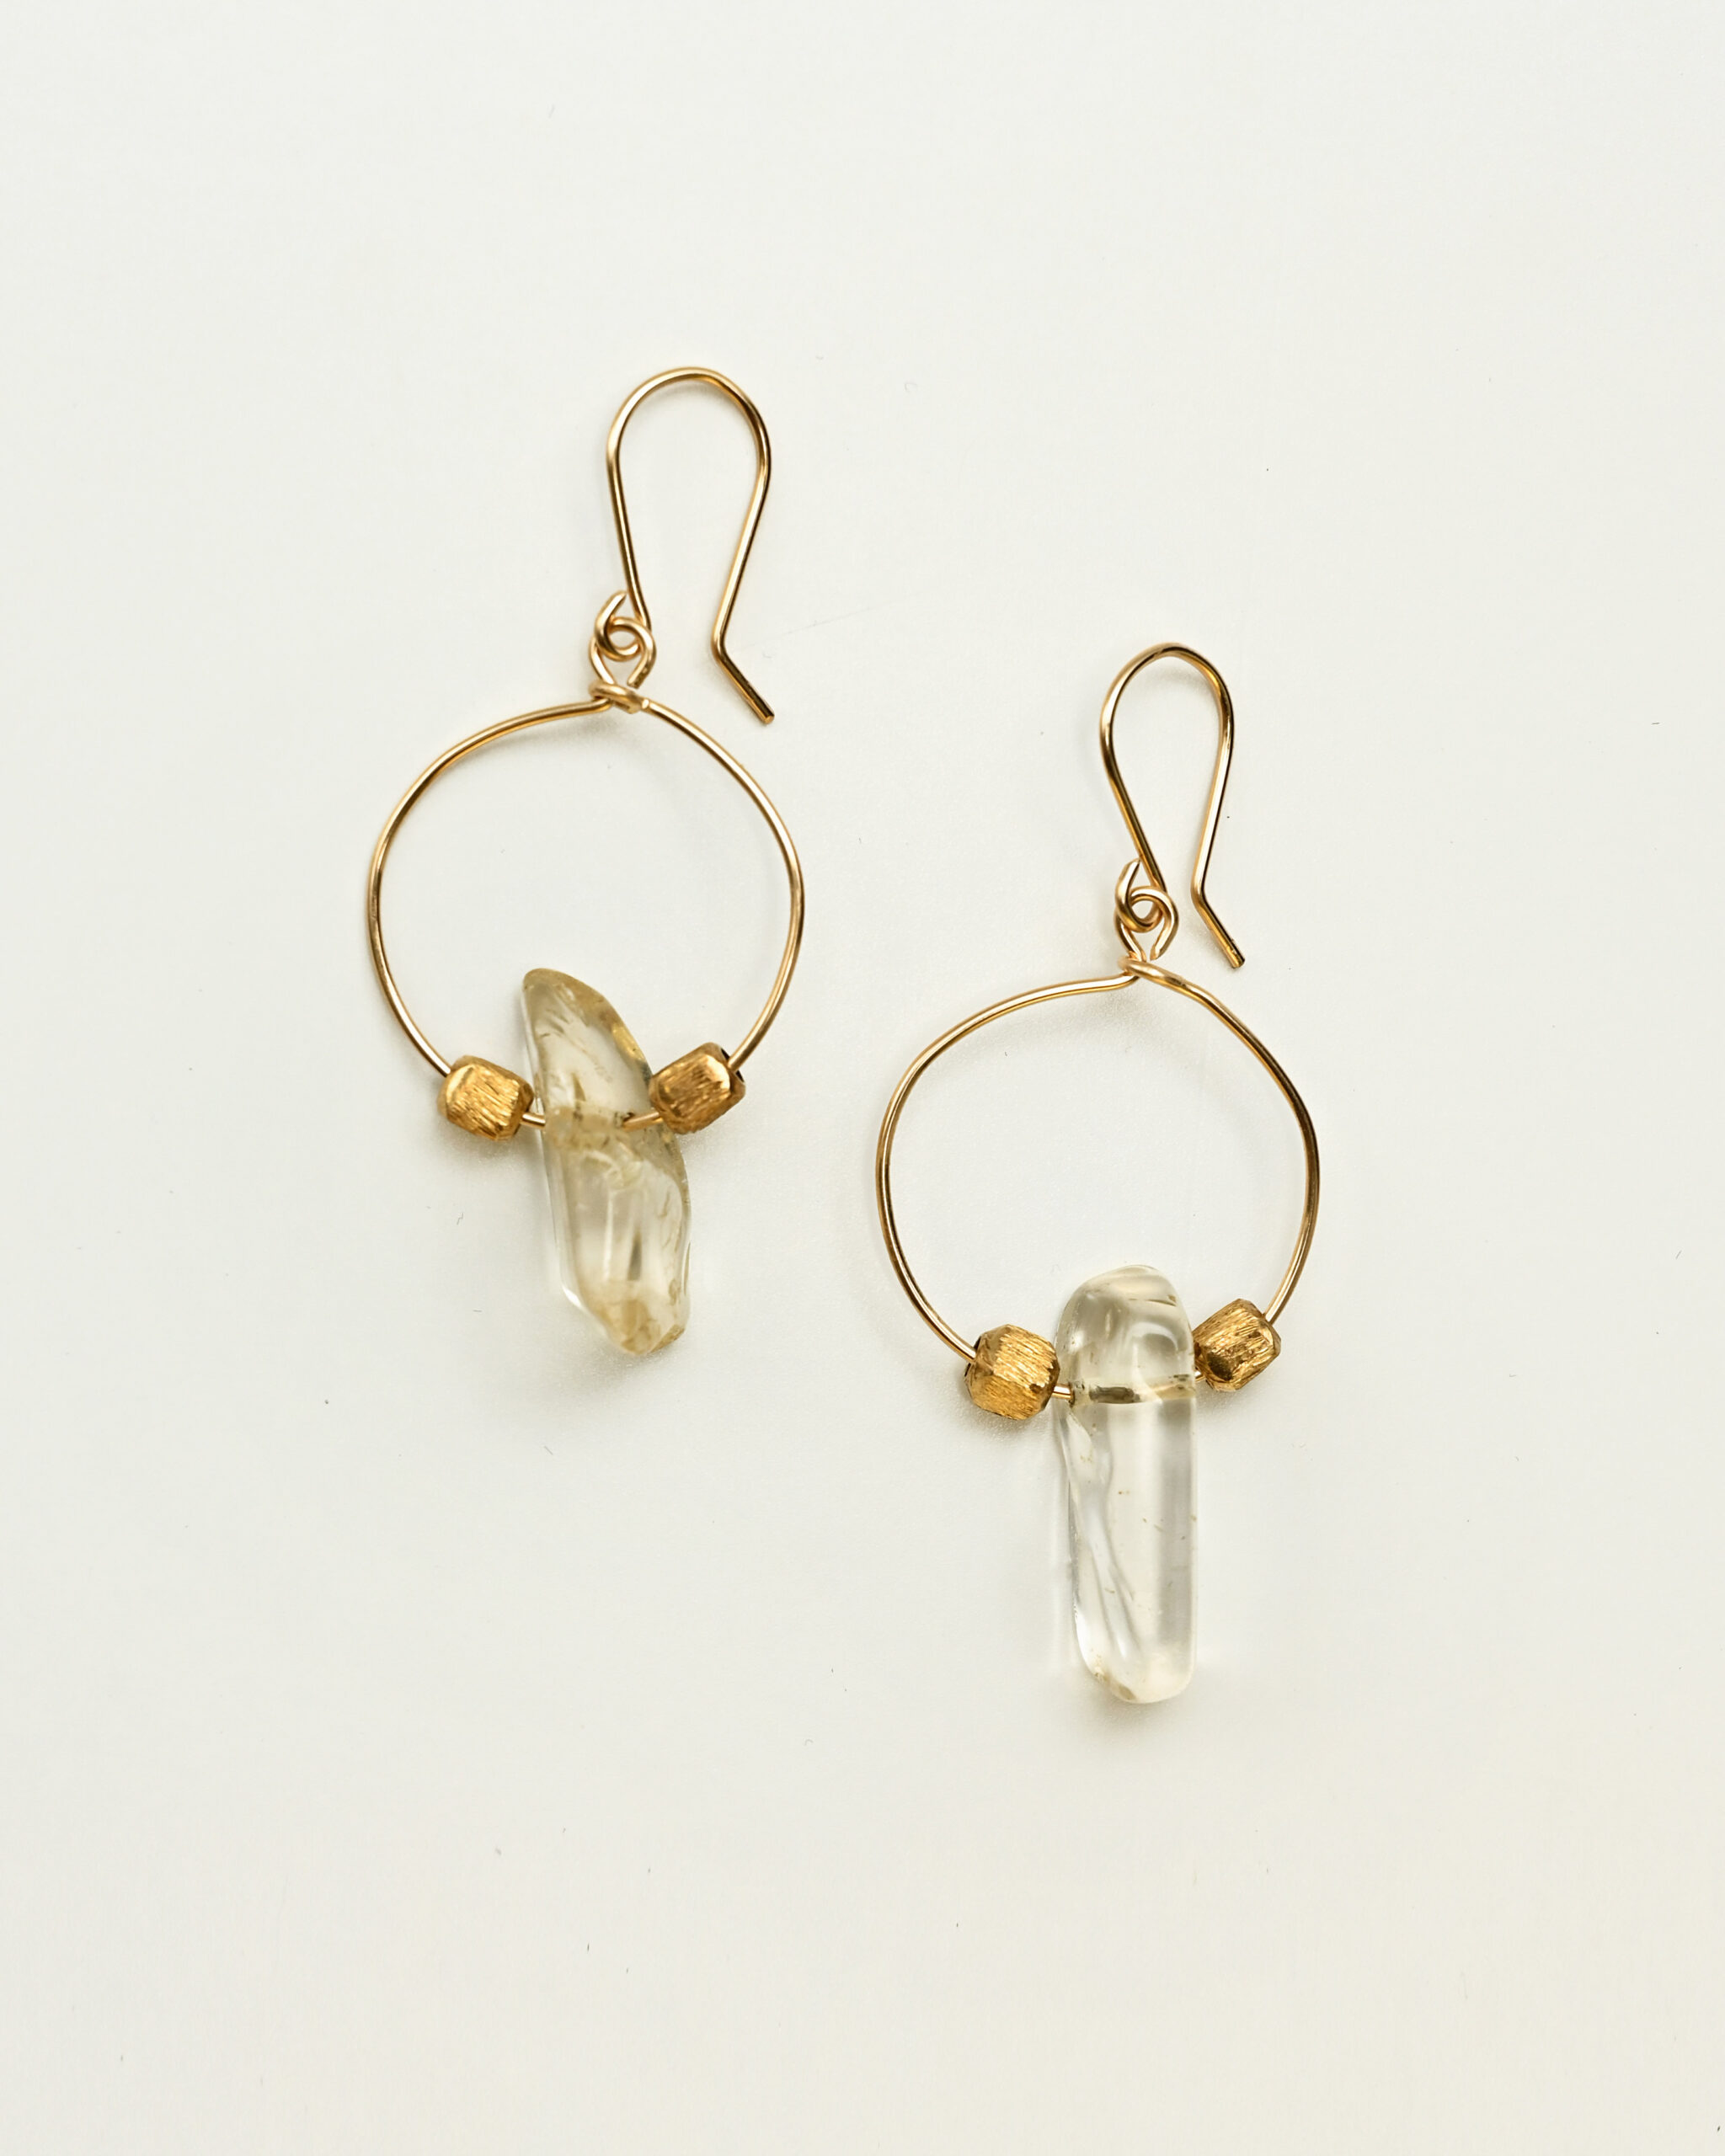 14k gold filled hoop earrings with citrine gemstone and 14k gold plated sterling silver elements